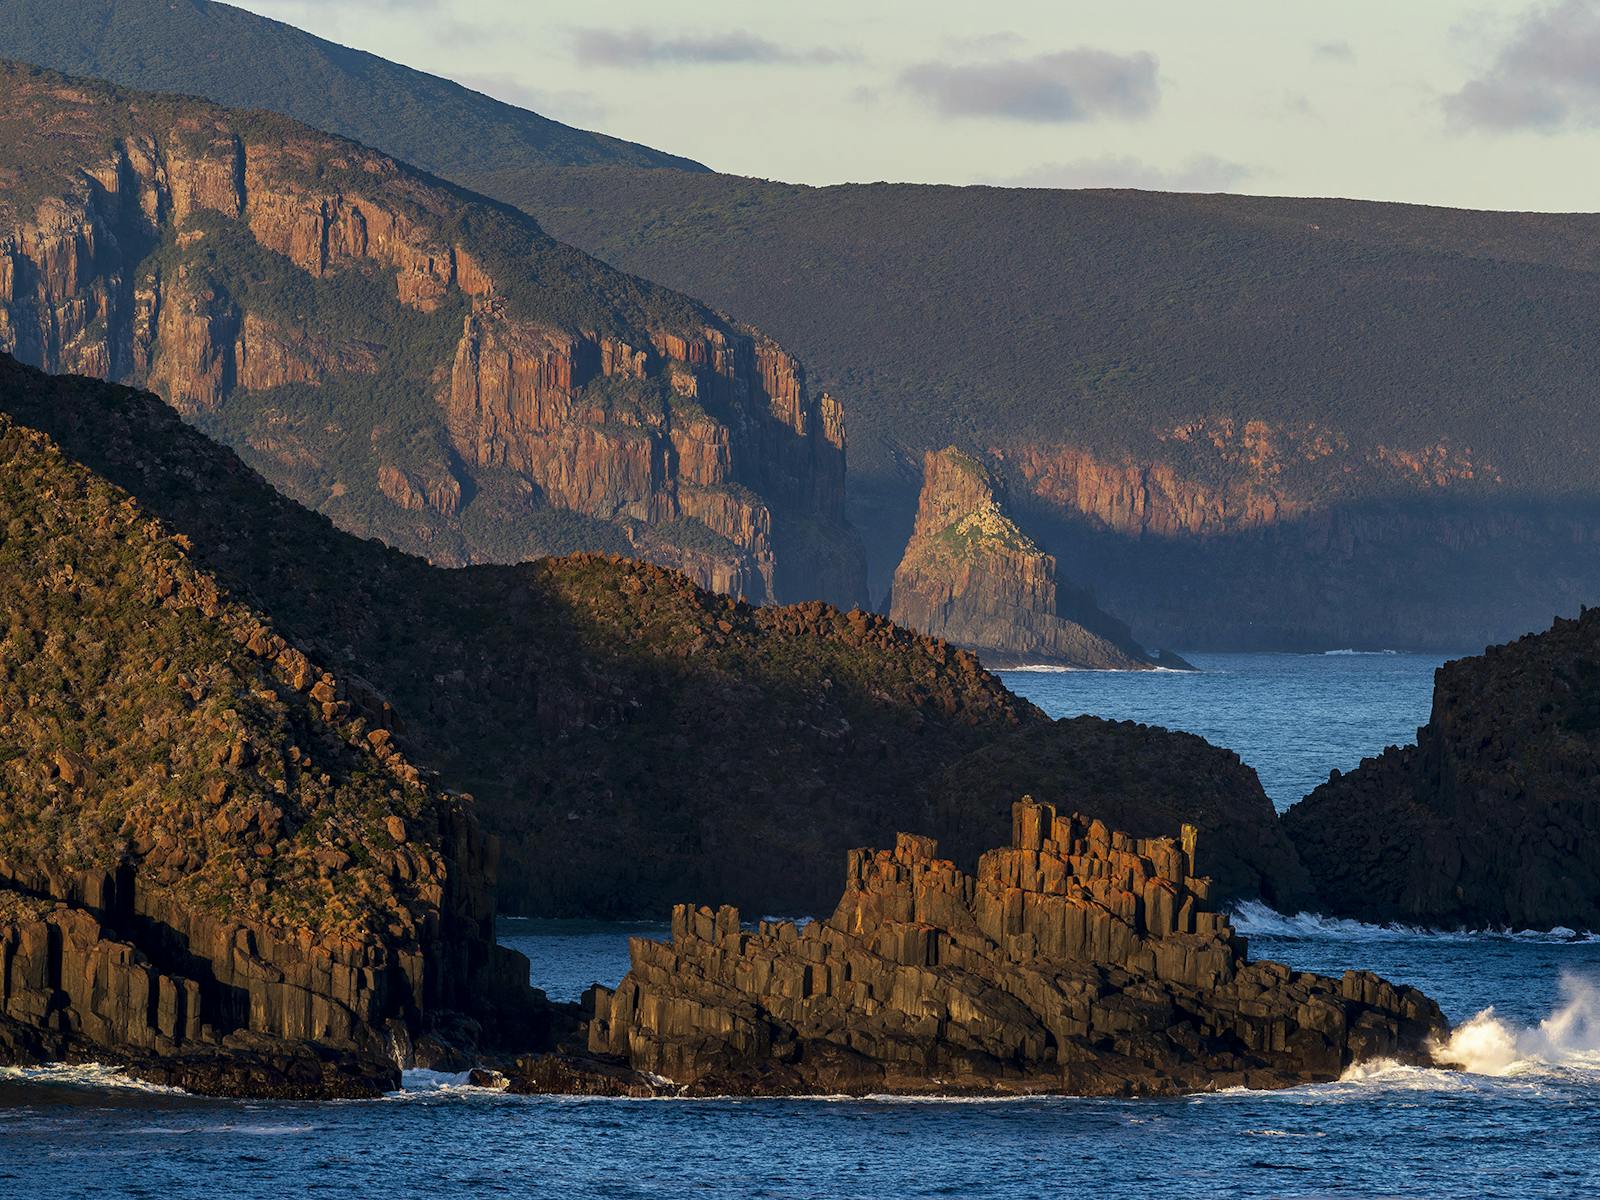 Rugged coast of Bruny Island. Available as a private 3 day photography tour